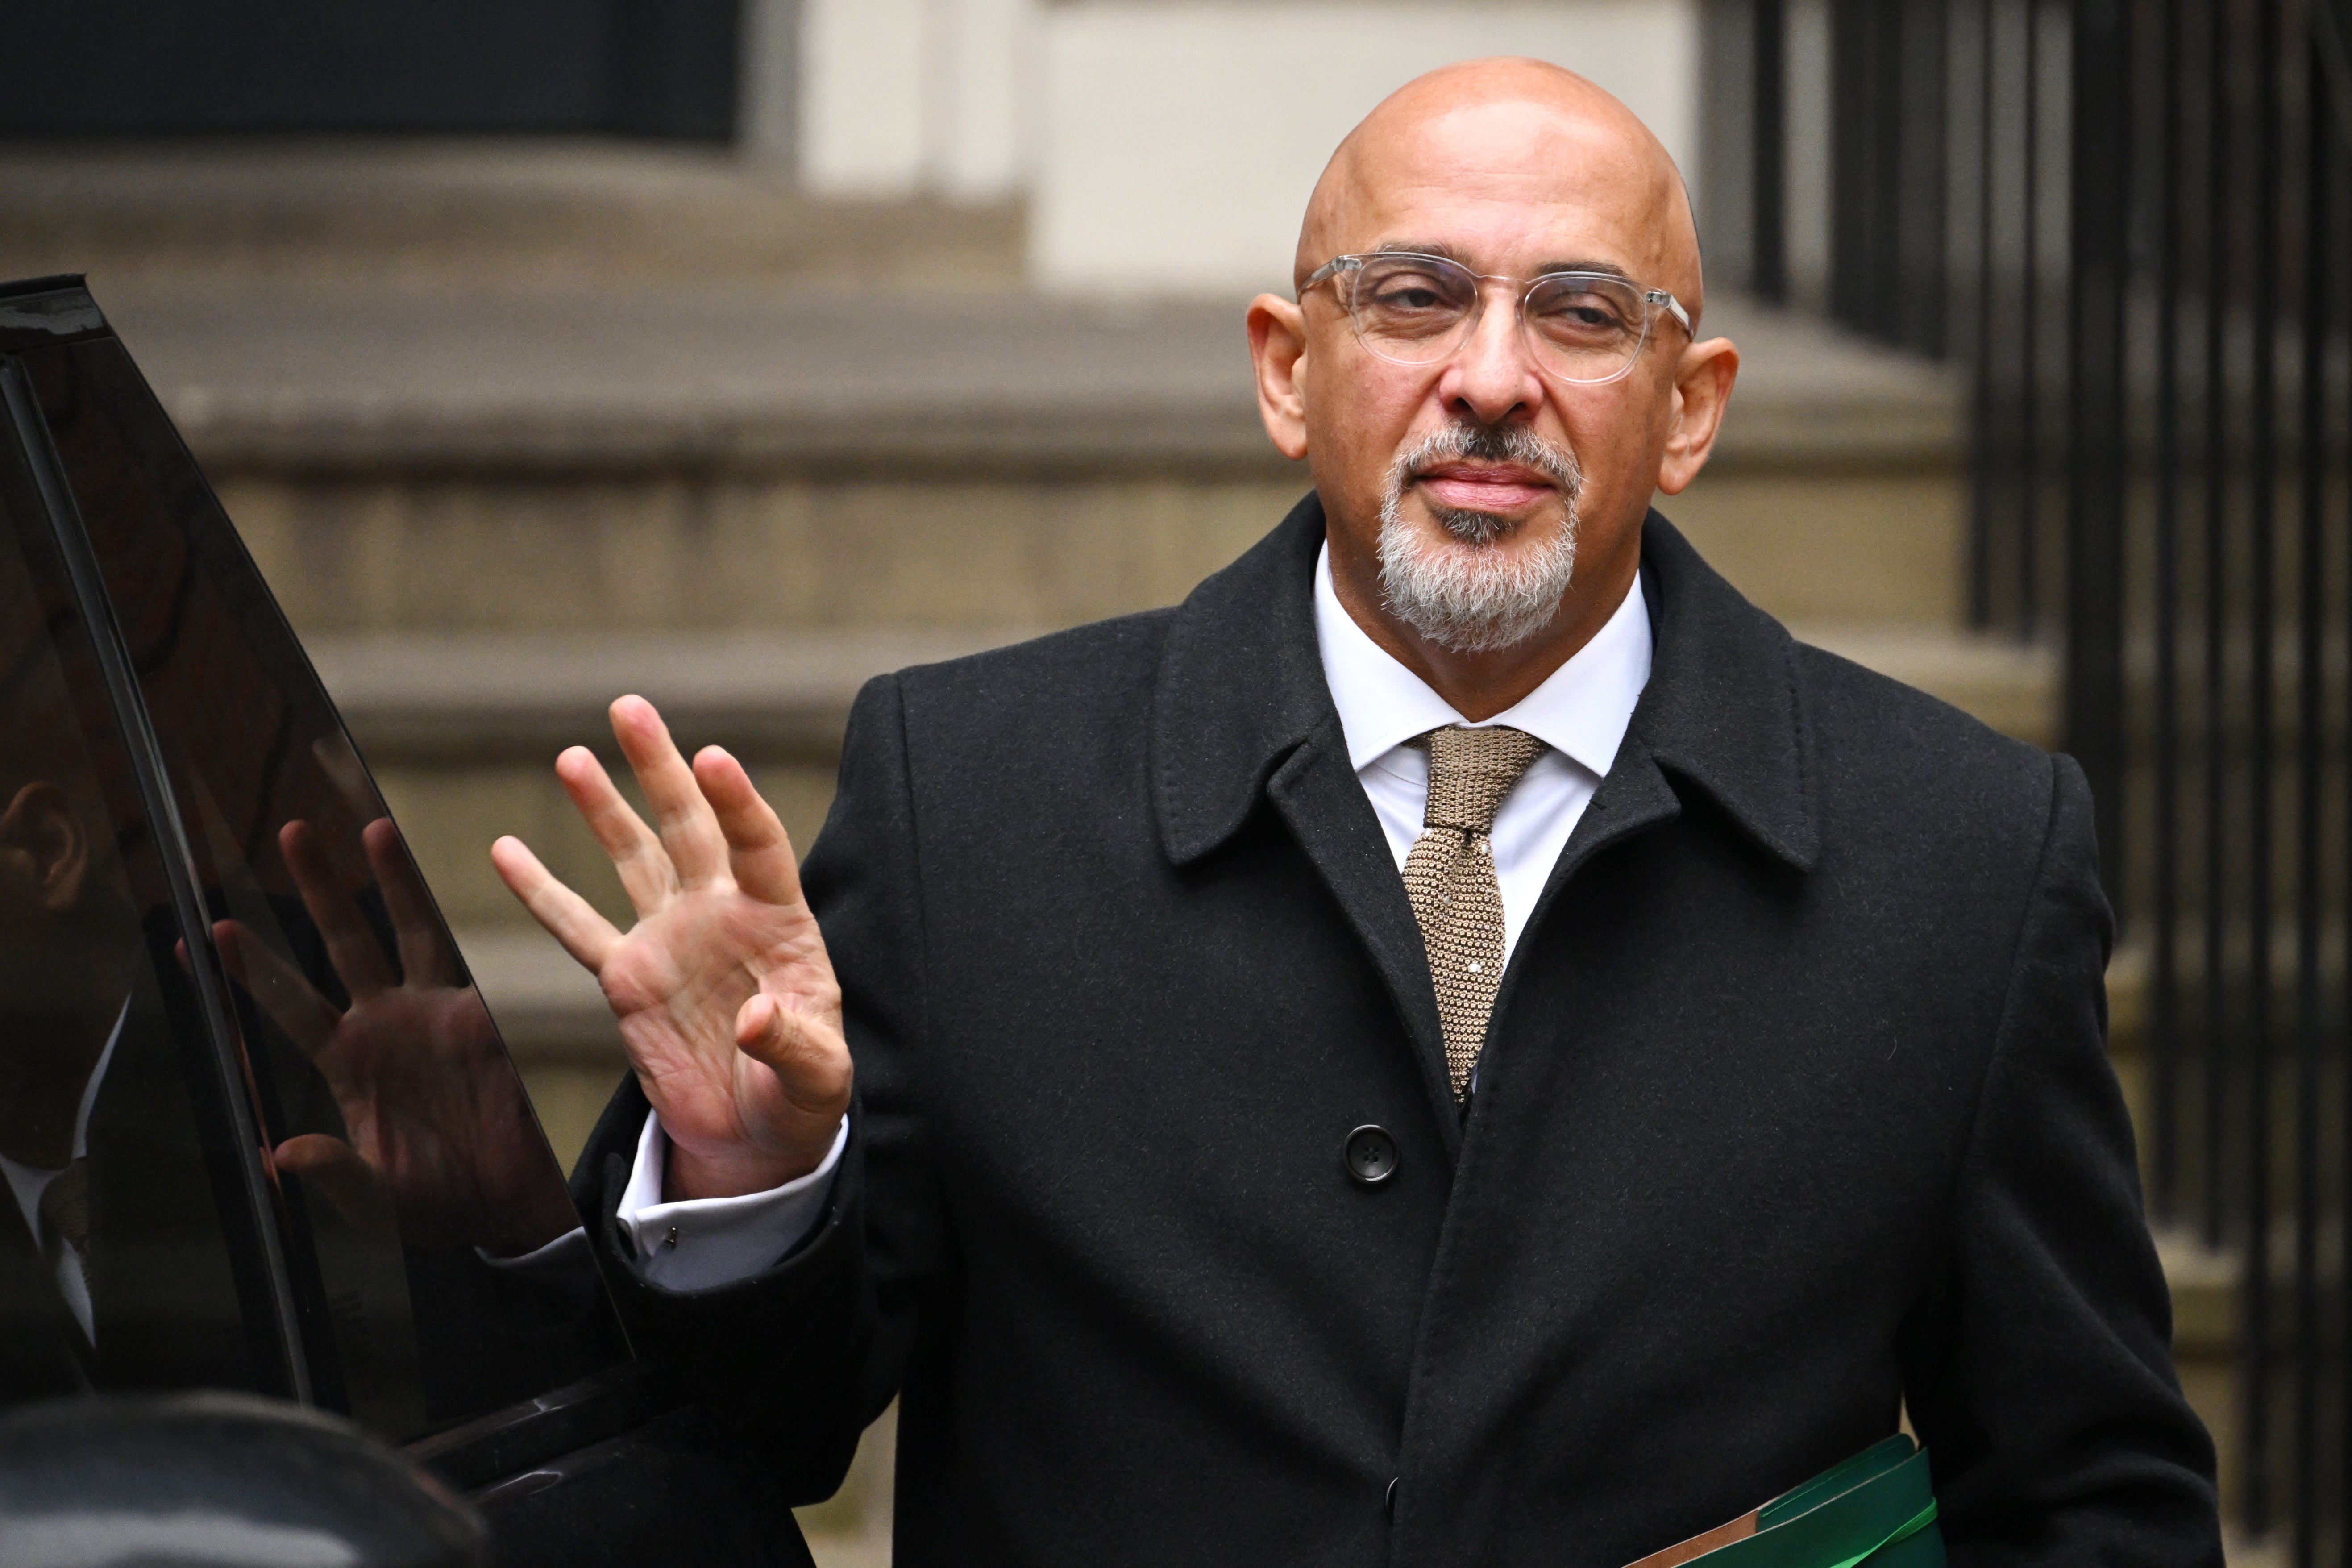 Oh, to be able to brush off mistakes like Nadhim Zahawi brushes off five million quid